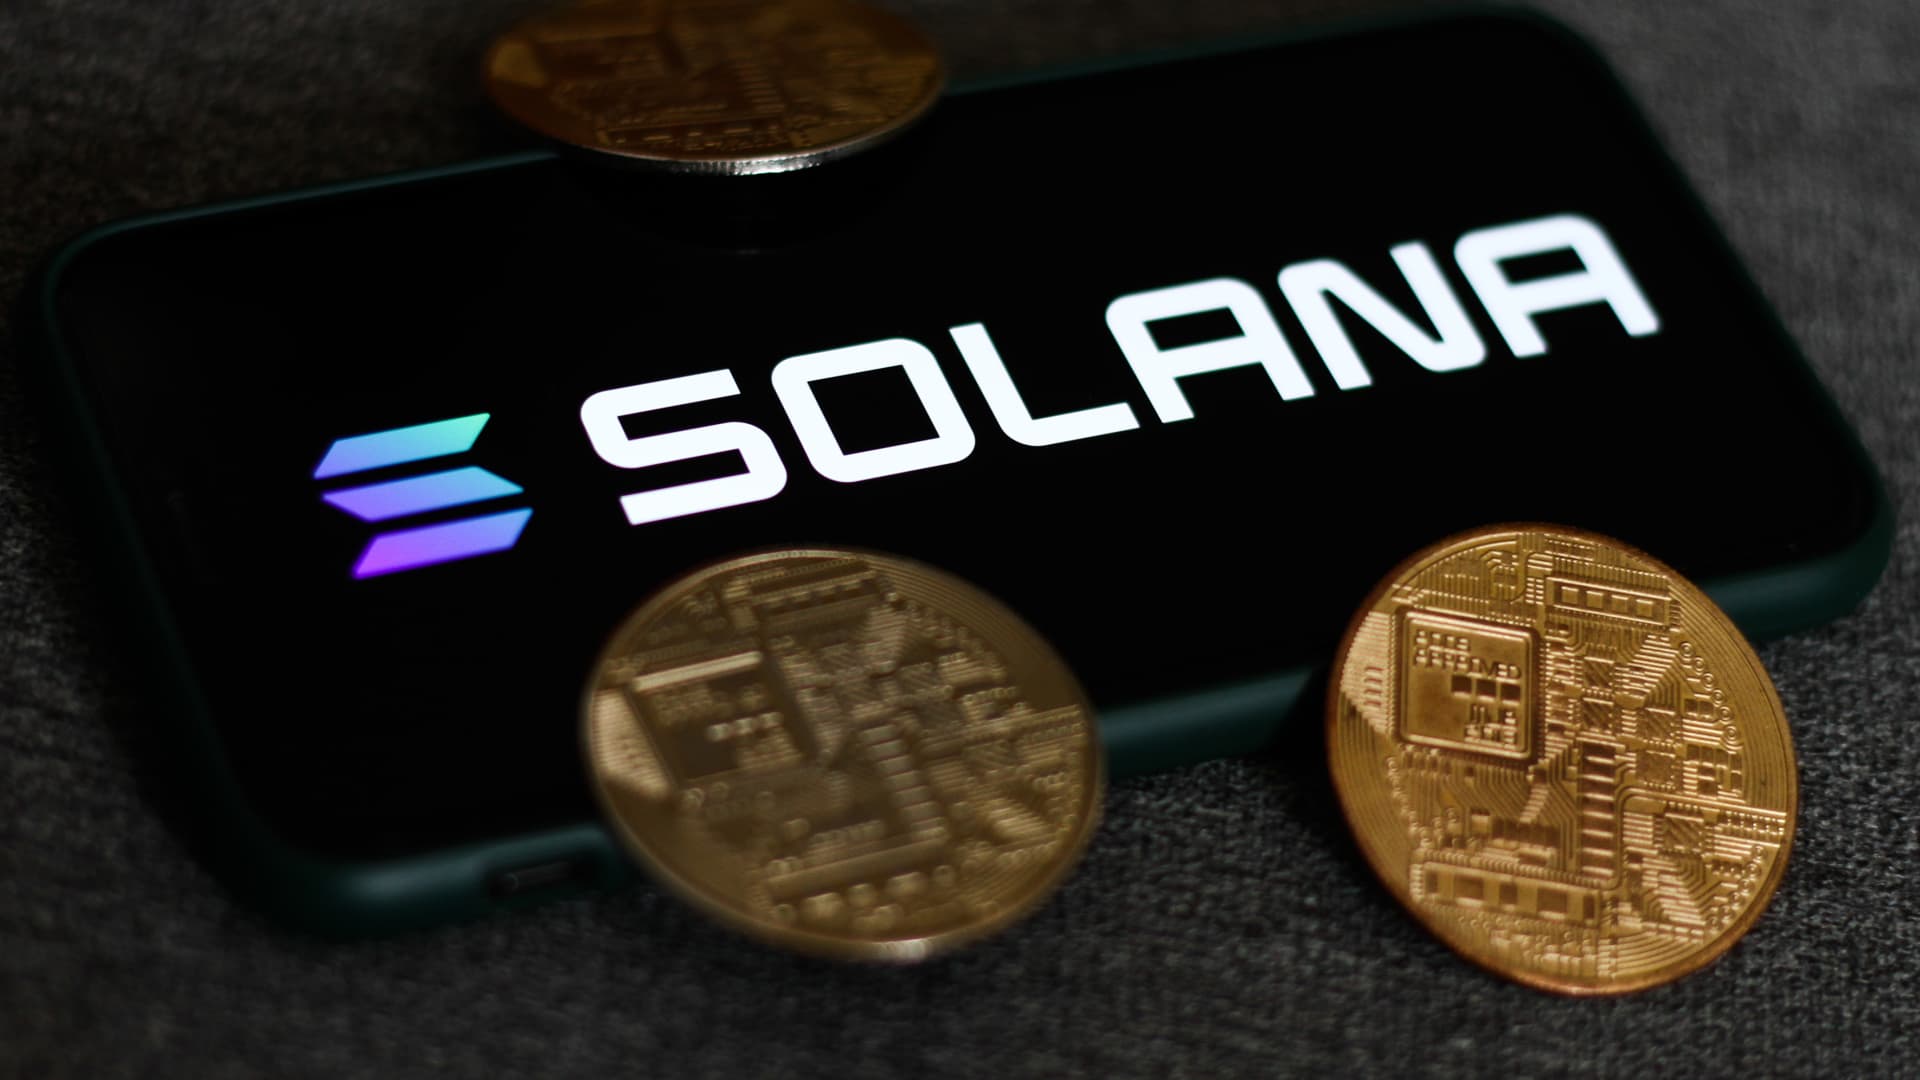 Solana jumps on Visa stablecoin announcement as bitcoin and other cryptocurrencies remain flat